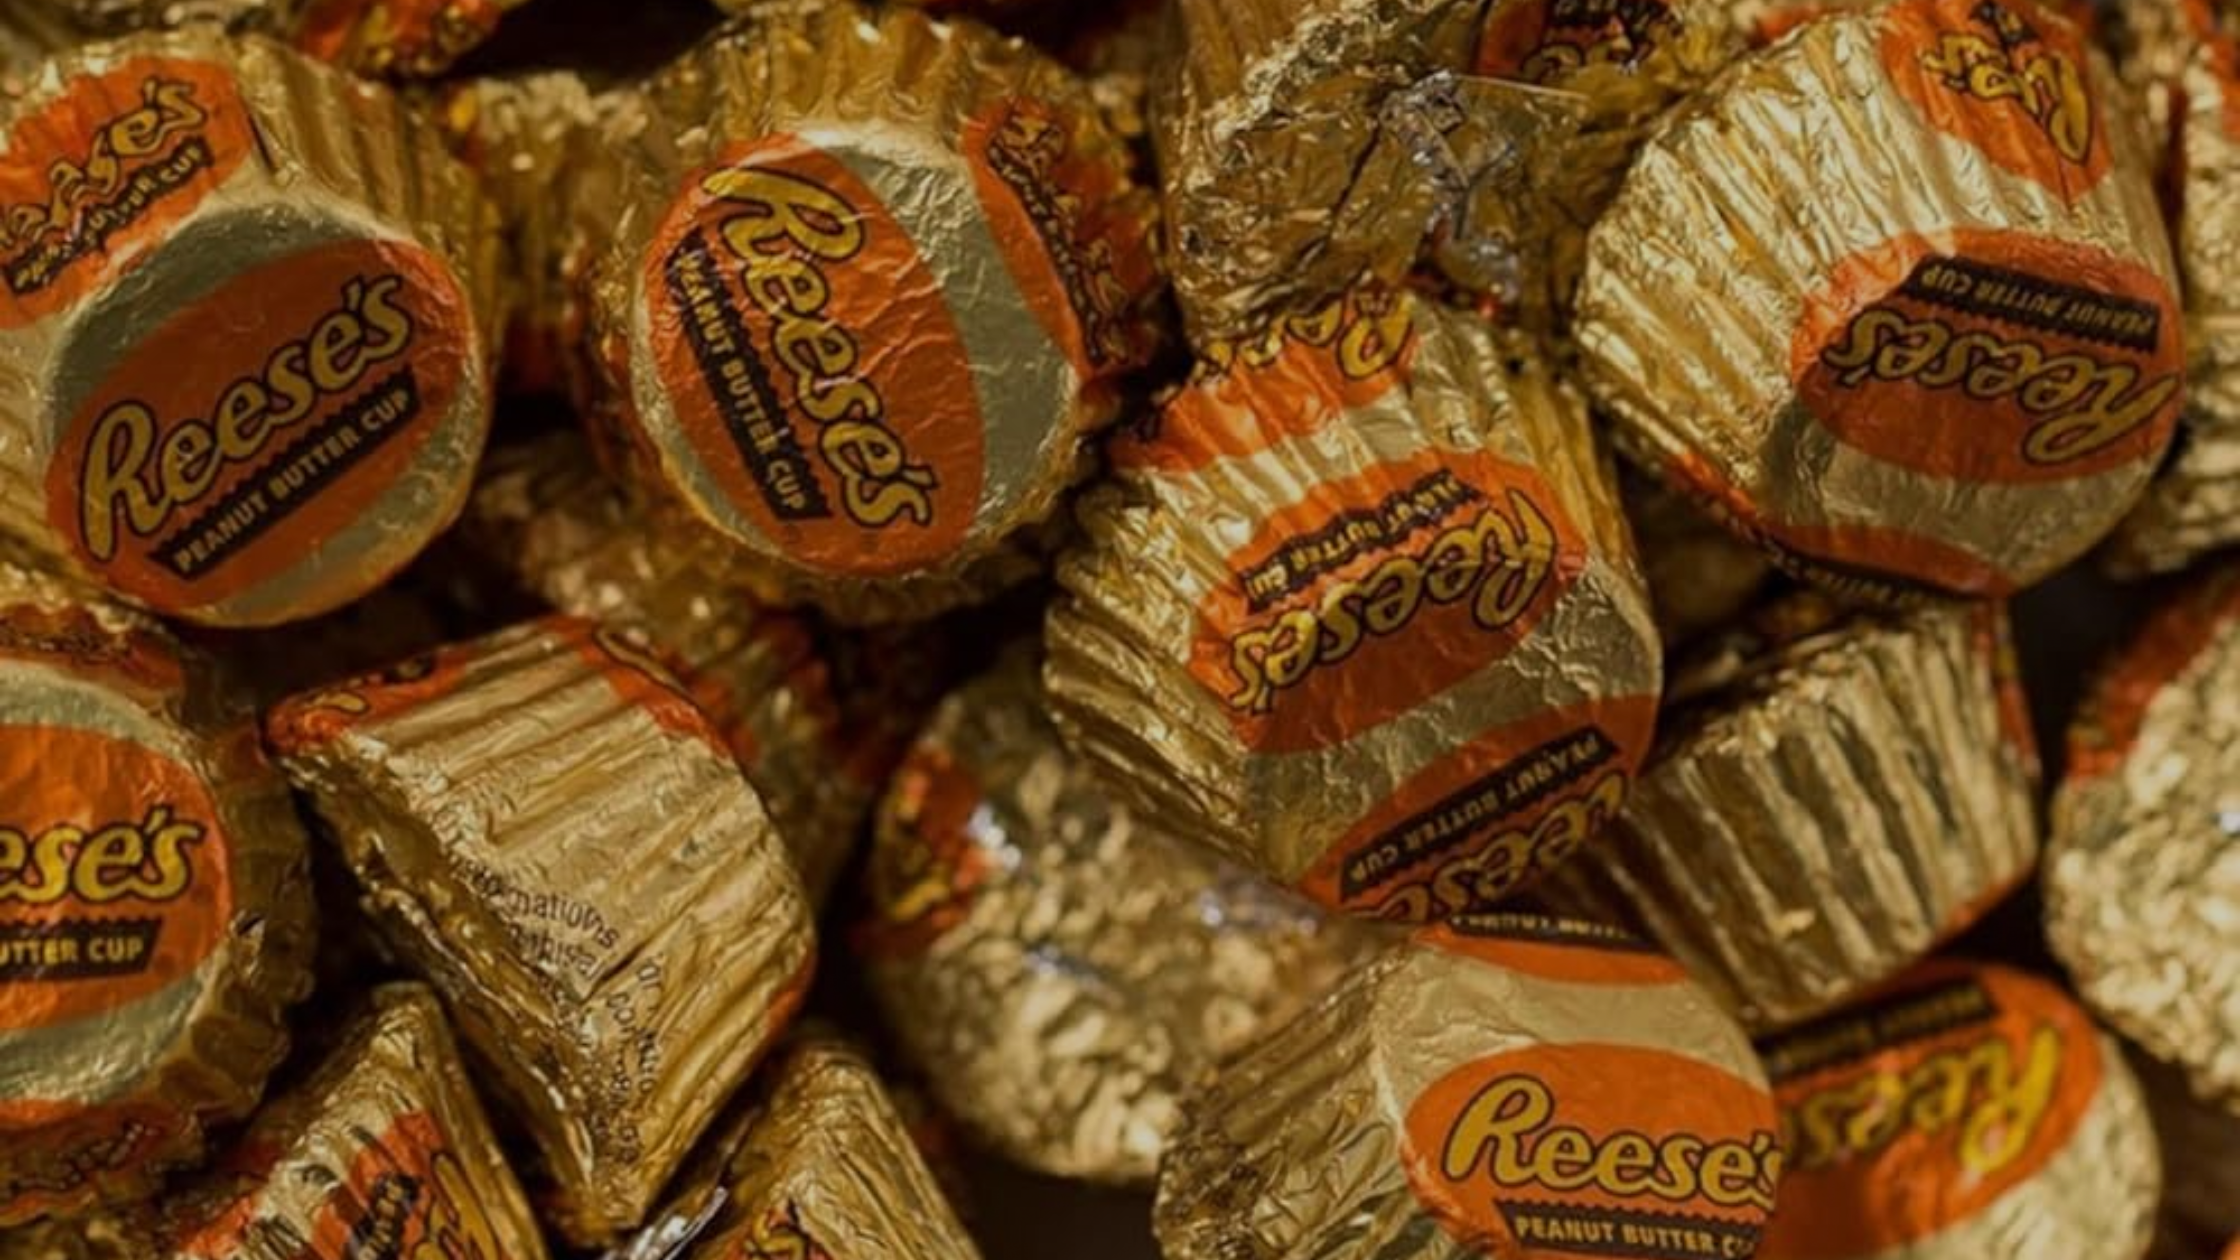 Try These Top 20 Reese's Products Before It's Too Late